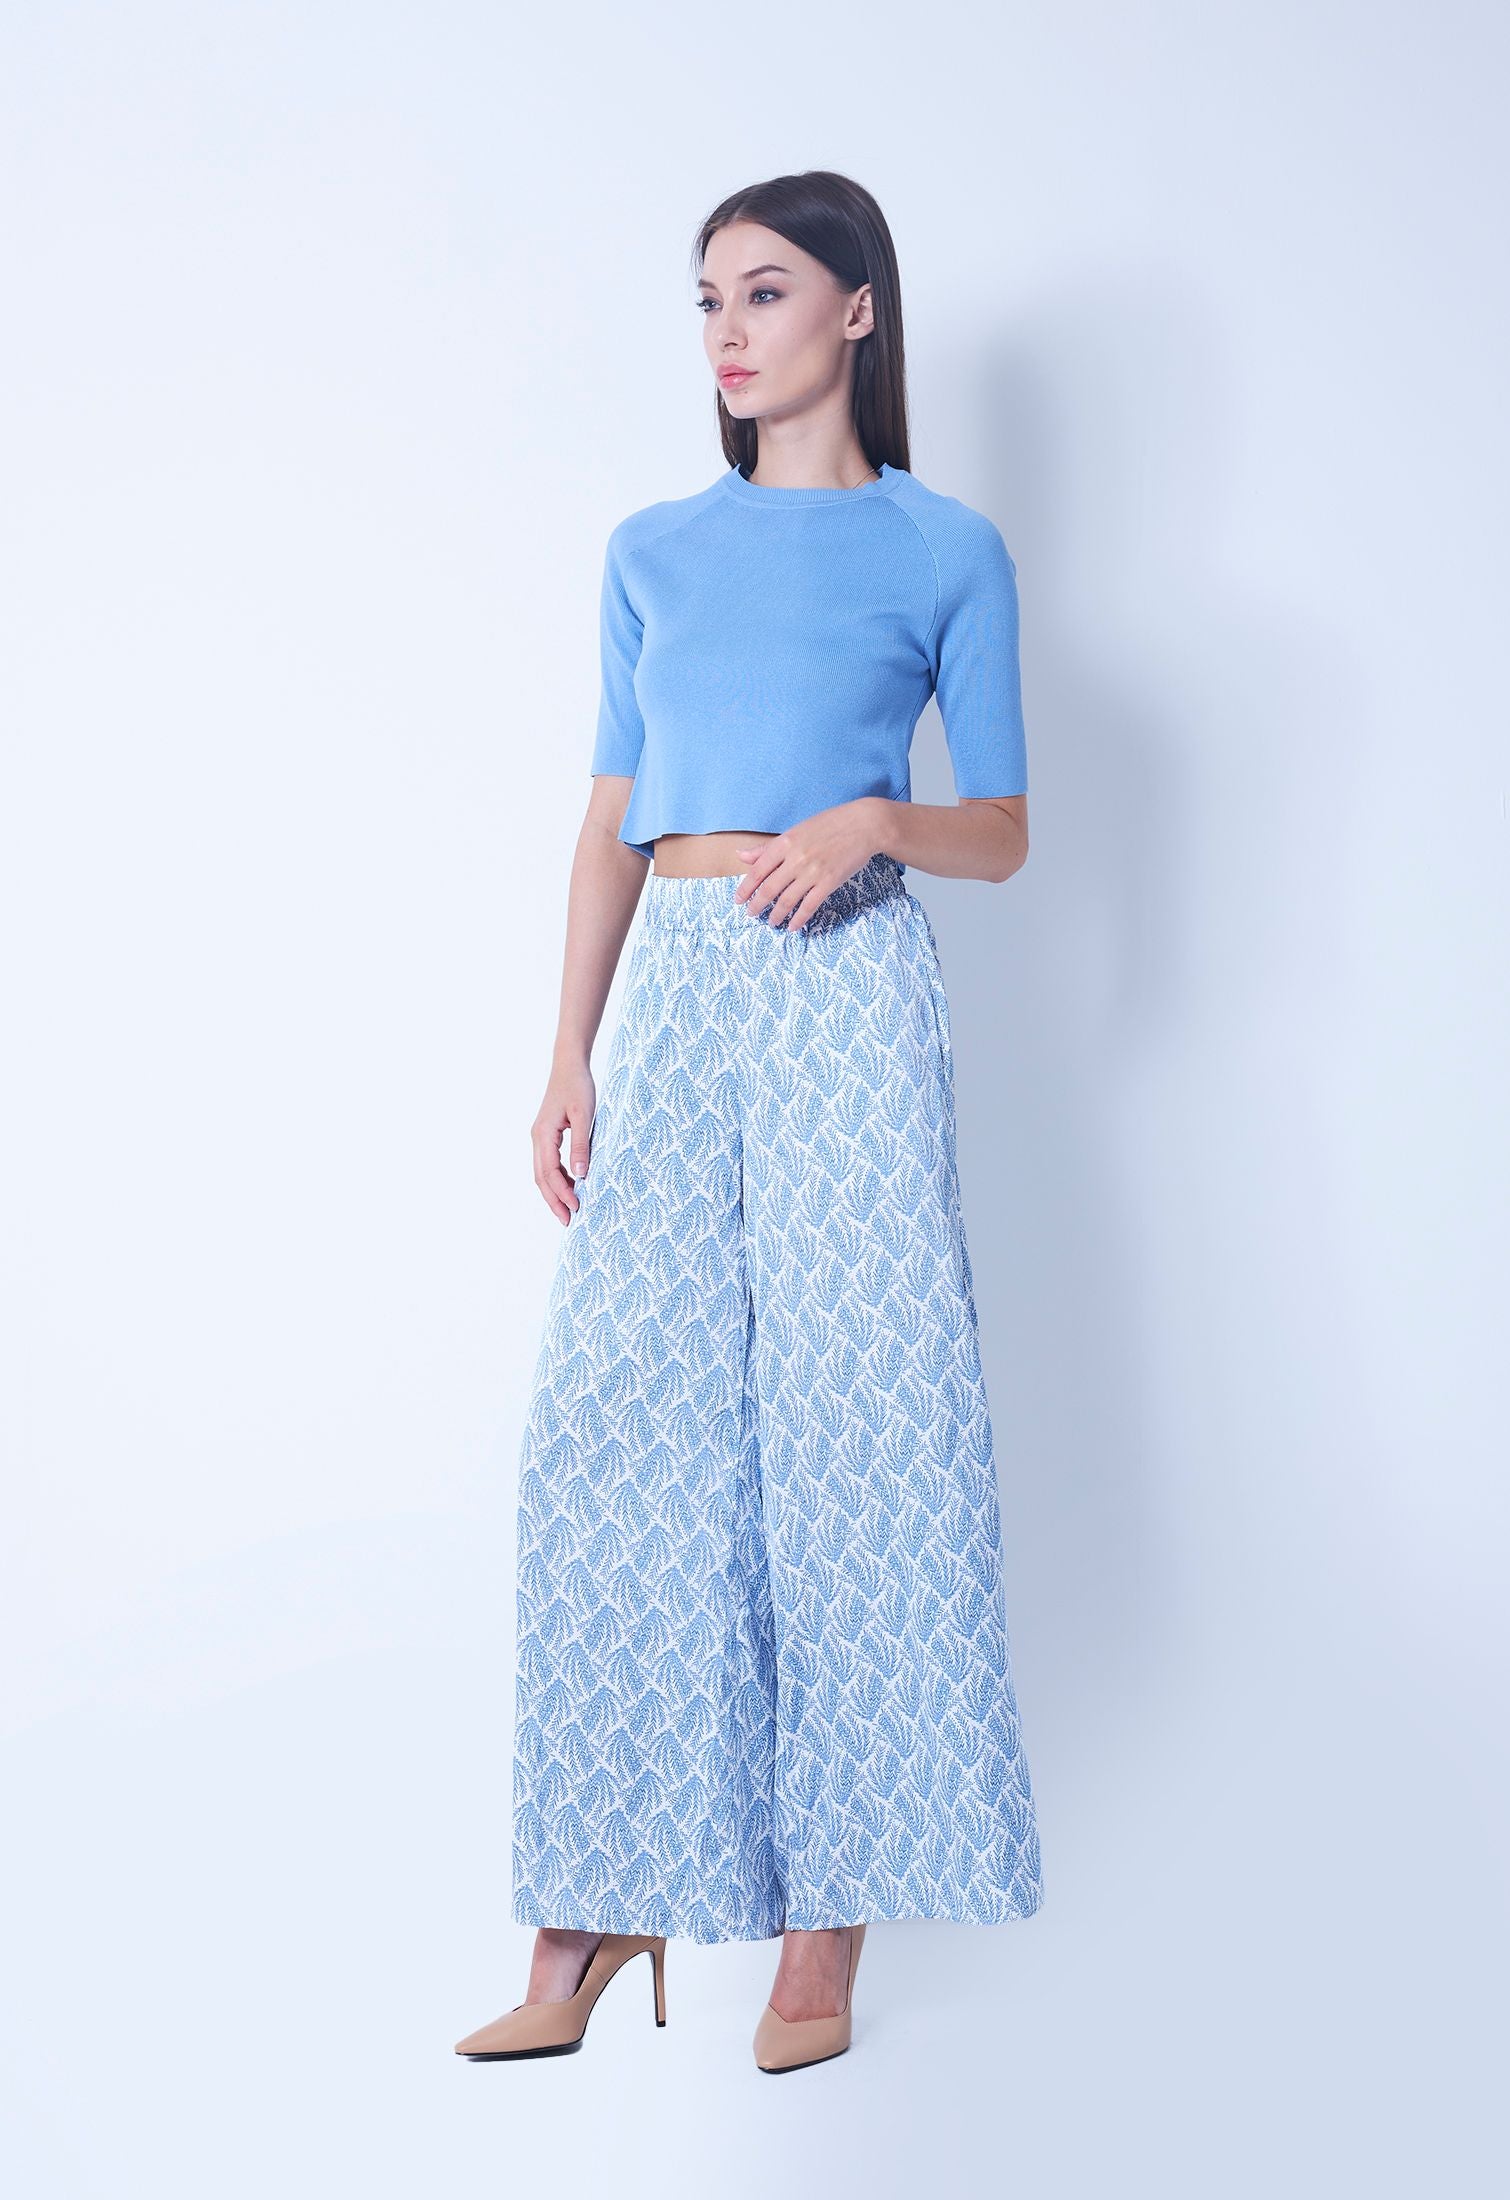 Leaf Allover Wide Legged Relaxed Pants